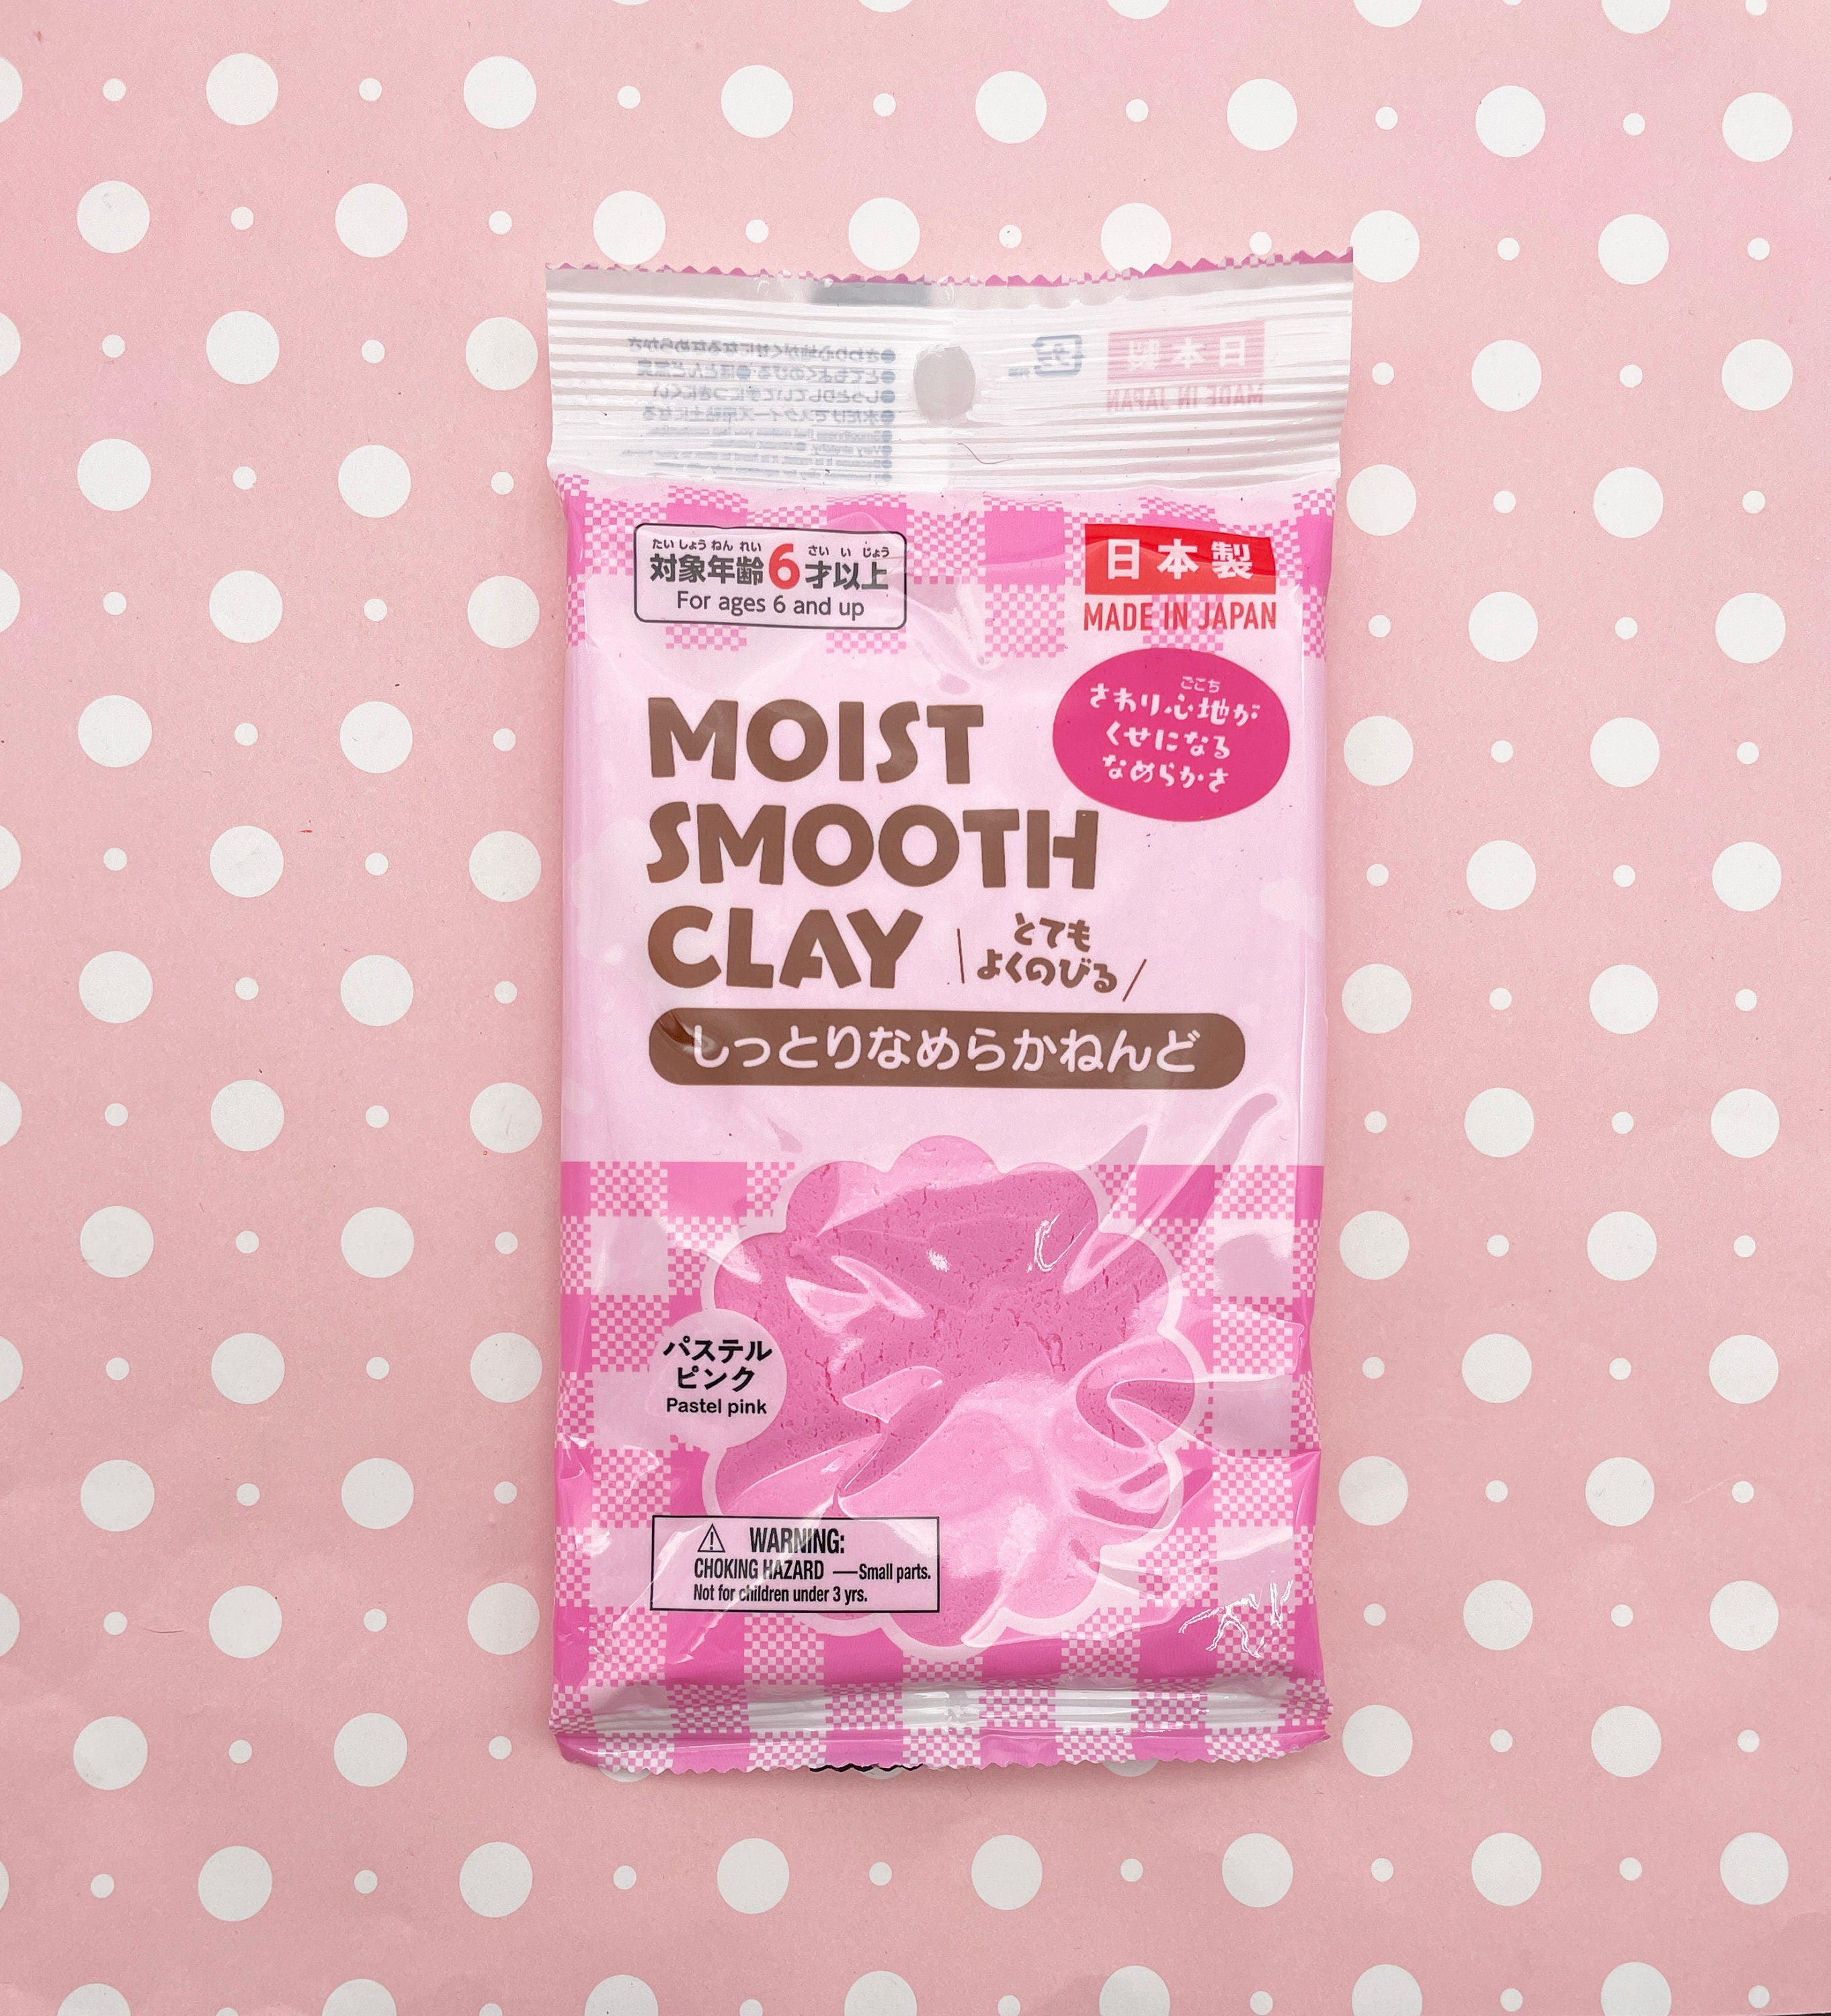 DAISO Soft Clay BLUE Color, Perfect for Butter Slime and Modeling Projects,  Approx 60g -  Denmark